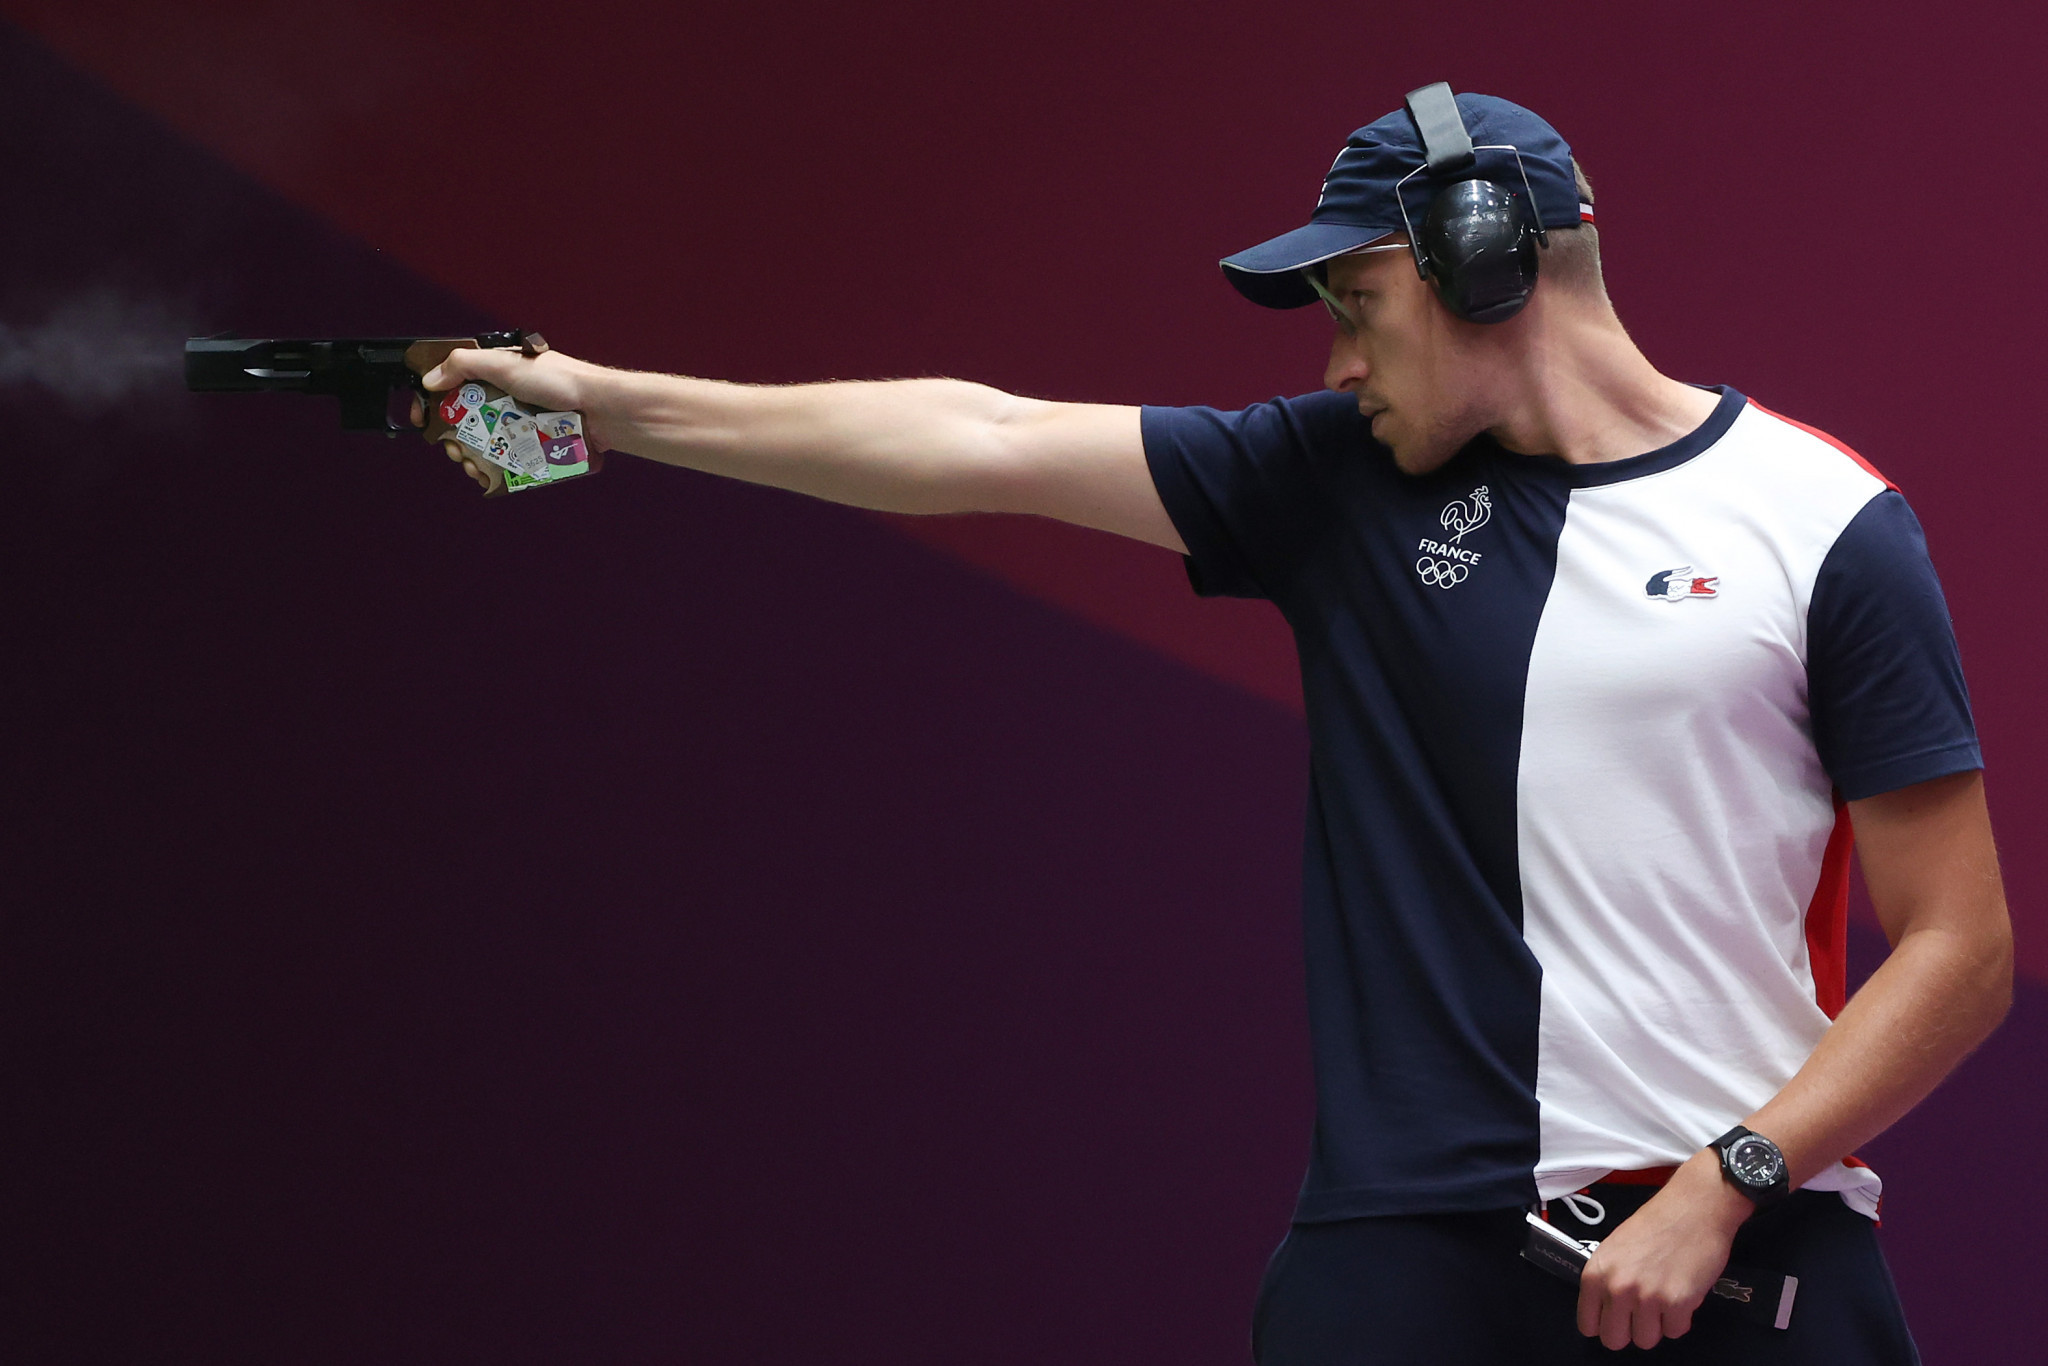 Jean Quiquampoix of France won gold in the men's 25 metres rapid fire pistol event on the penultimate day of the ISSF World Cup in Cairo ©Getty Images 